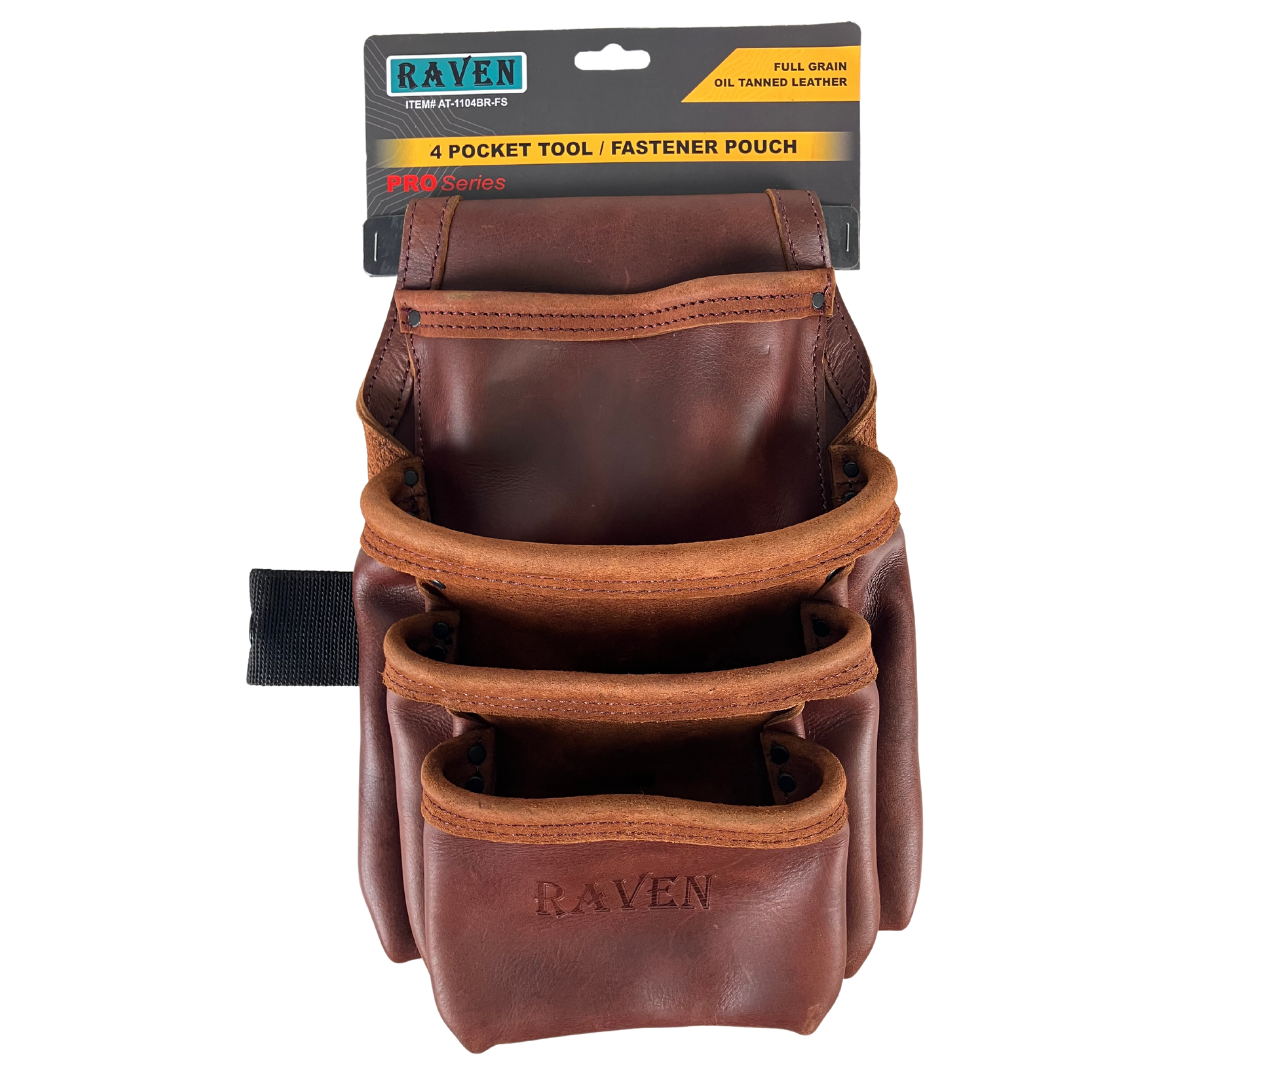 4 Pouch Professional's Heavy Duty Fastener Tool Pouch | Full Grain Oil Tanned Leather